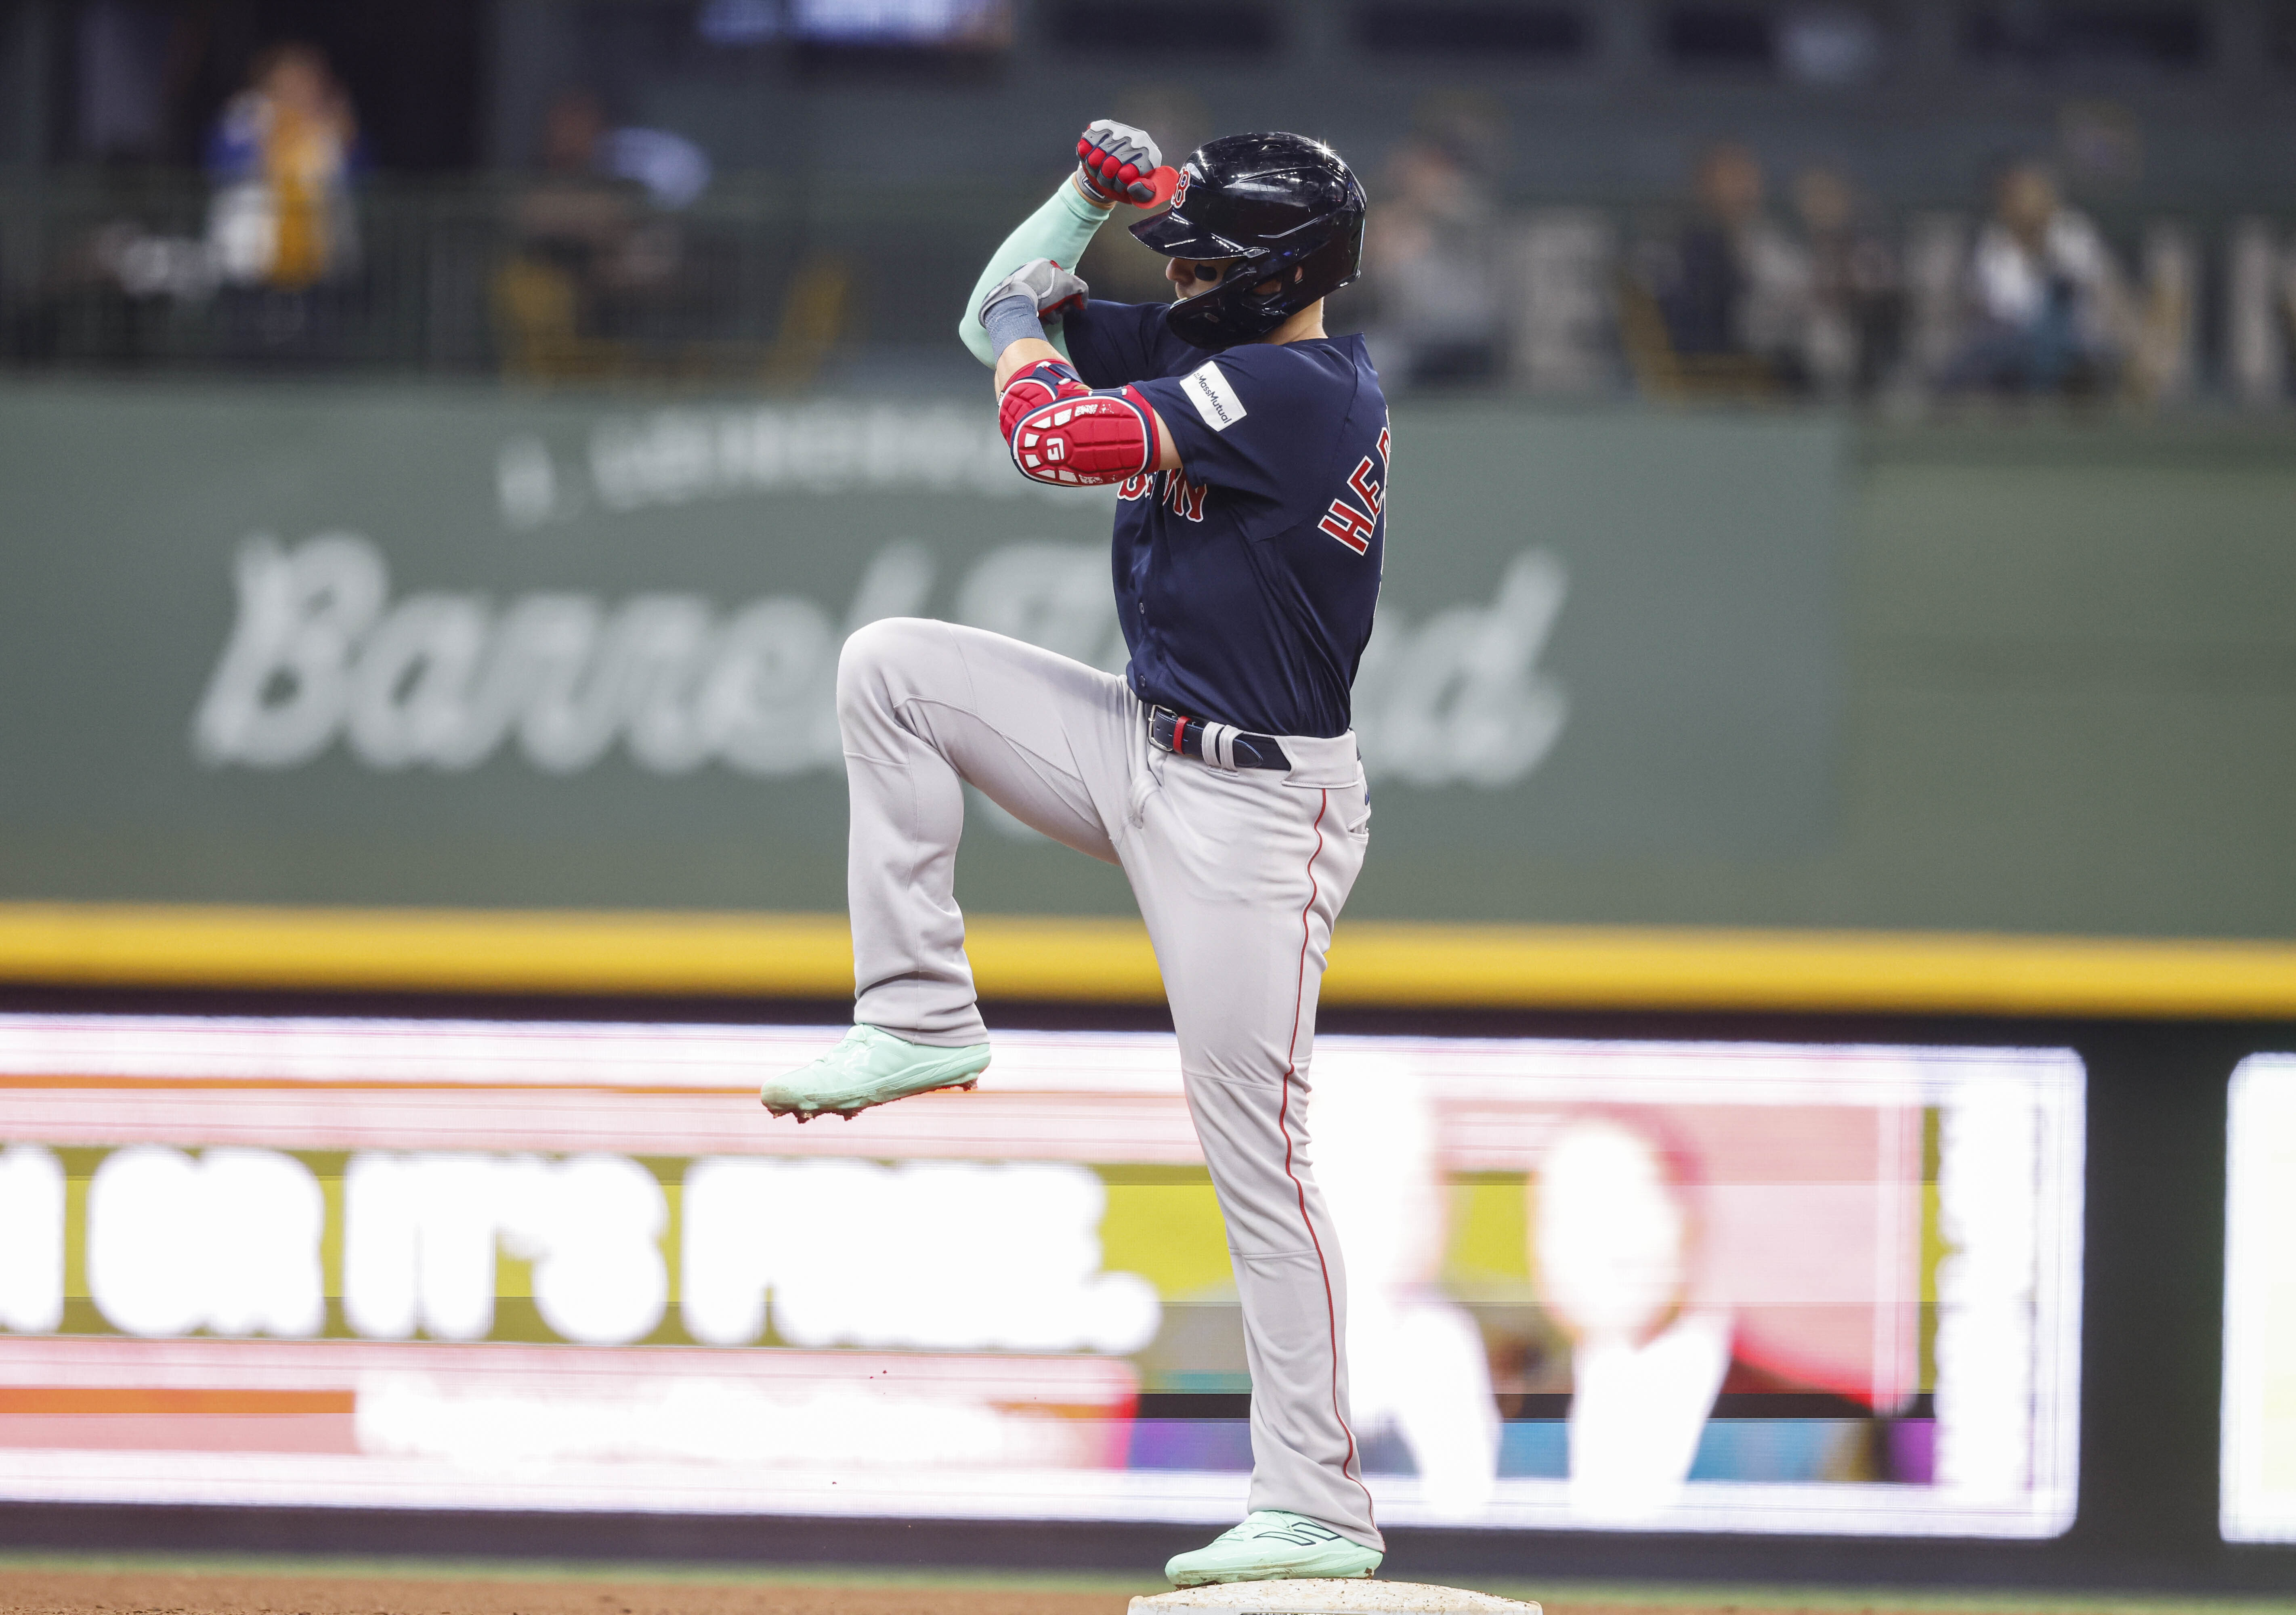 Yoshida homers twice in 8th as Red Sox beat Brewers 12-5